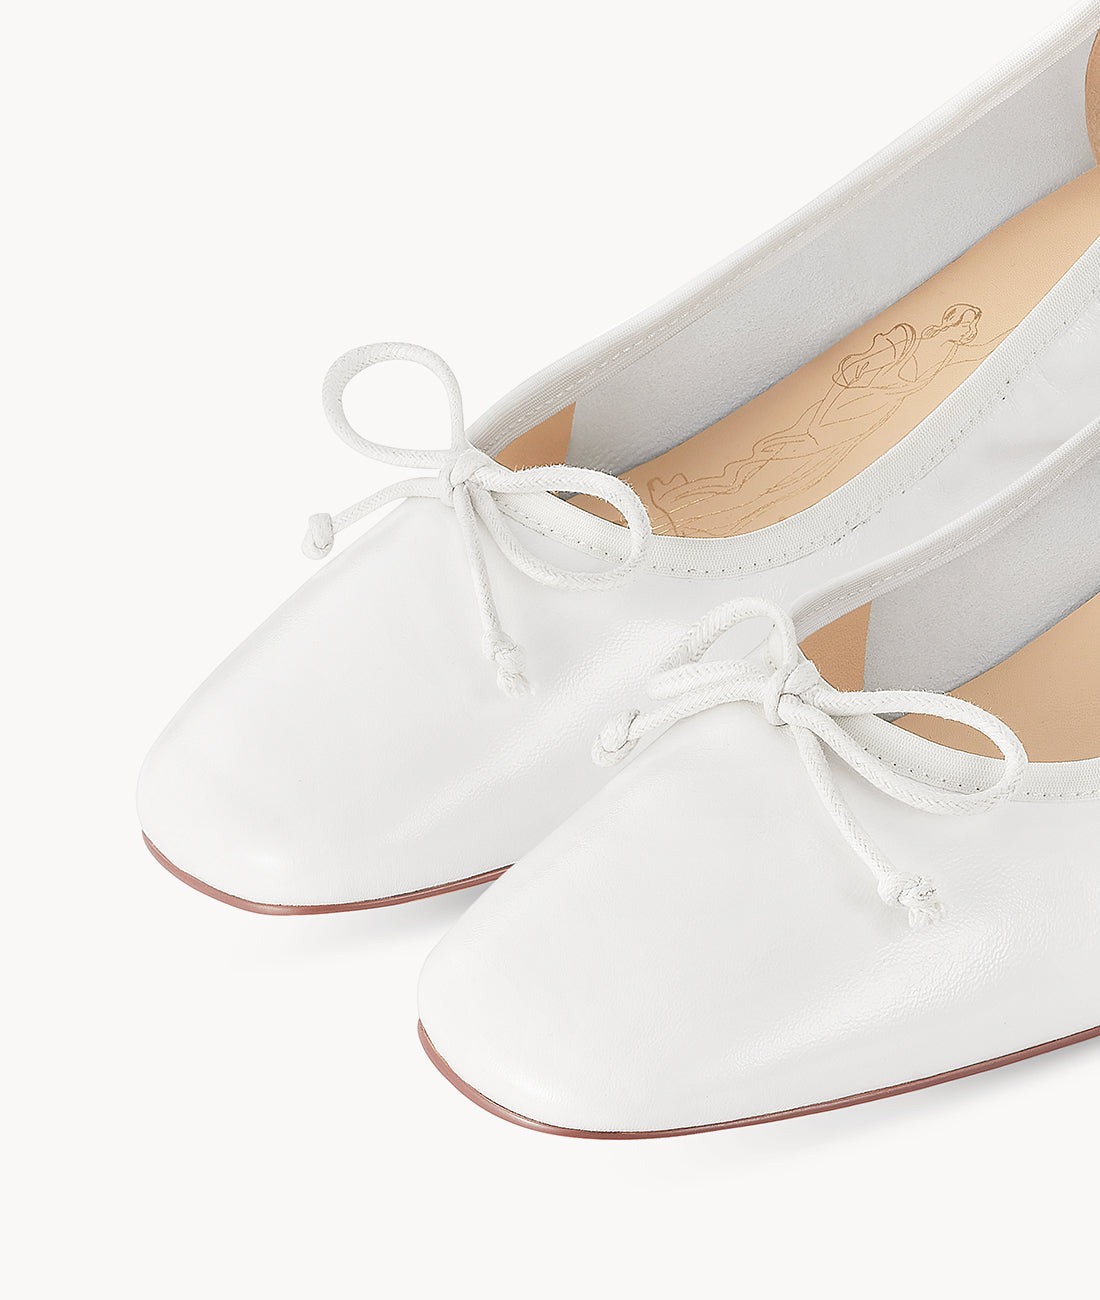 Milk Roll Air-touch Foam Round-toe white Ballet Shoes with bow